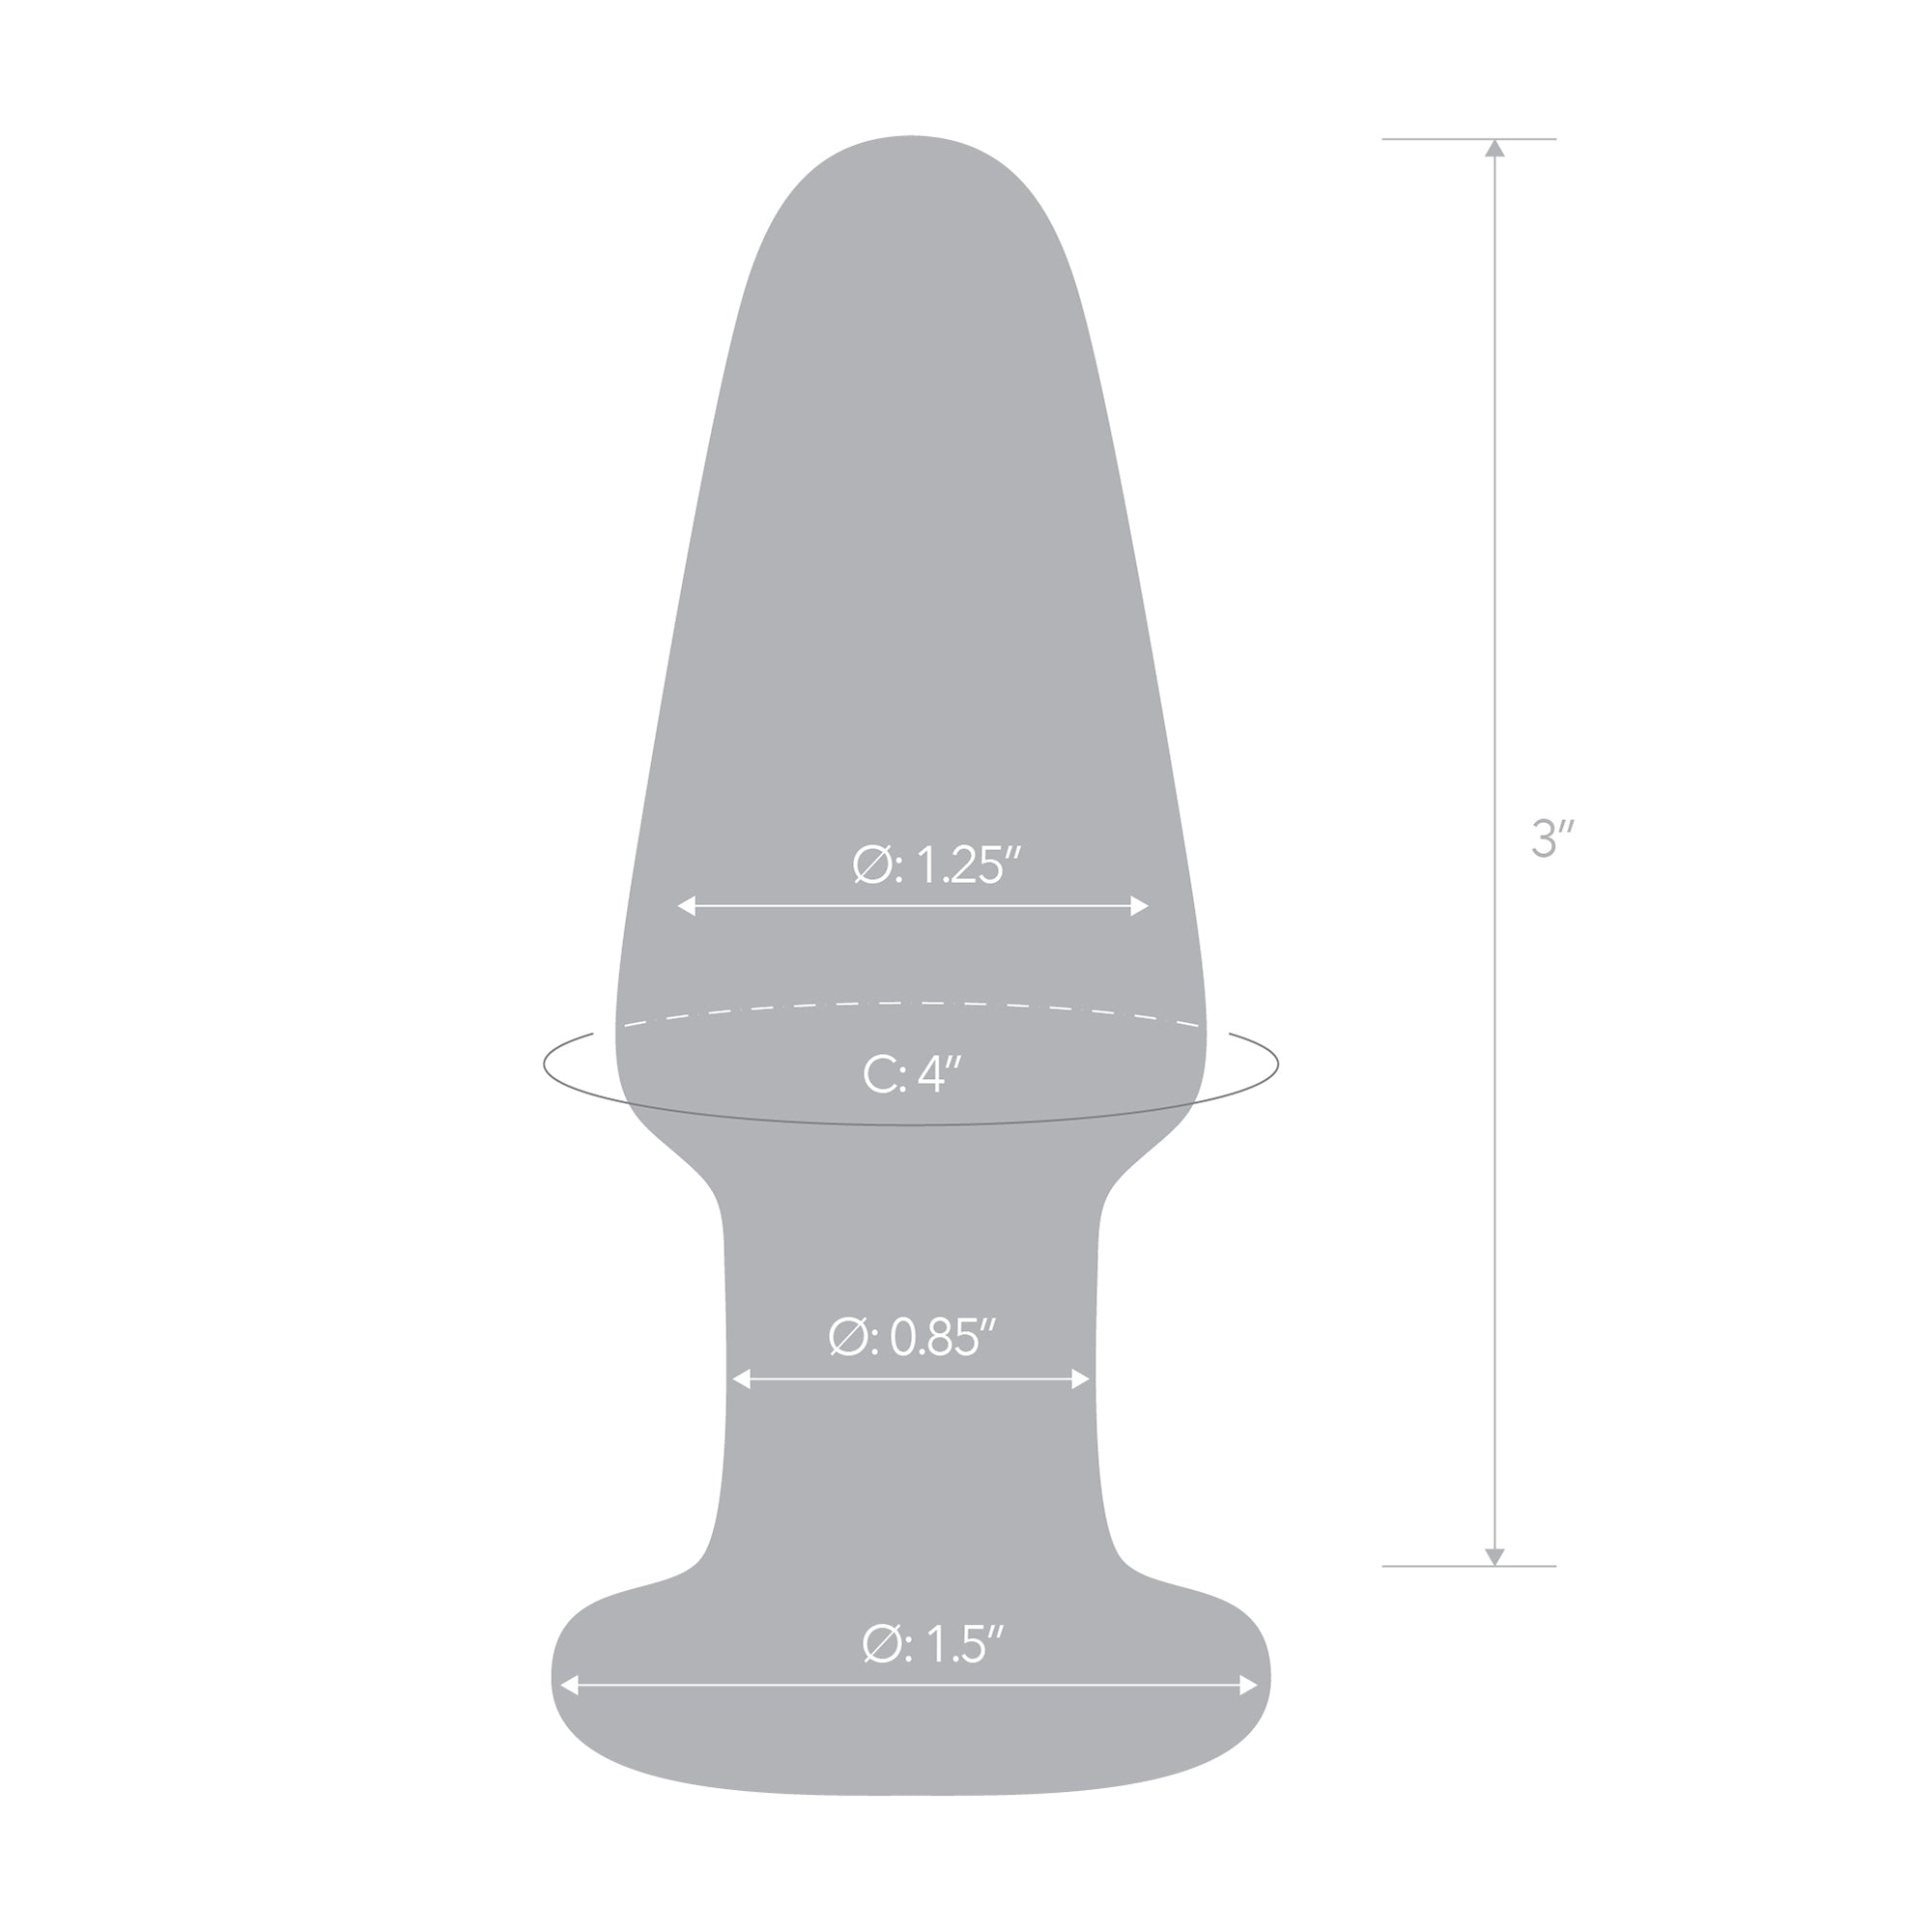 Specifications of the Gläs 3.5 inch Glass Butt Plug